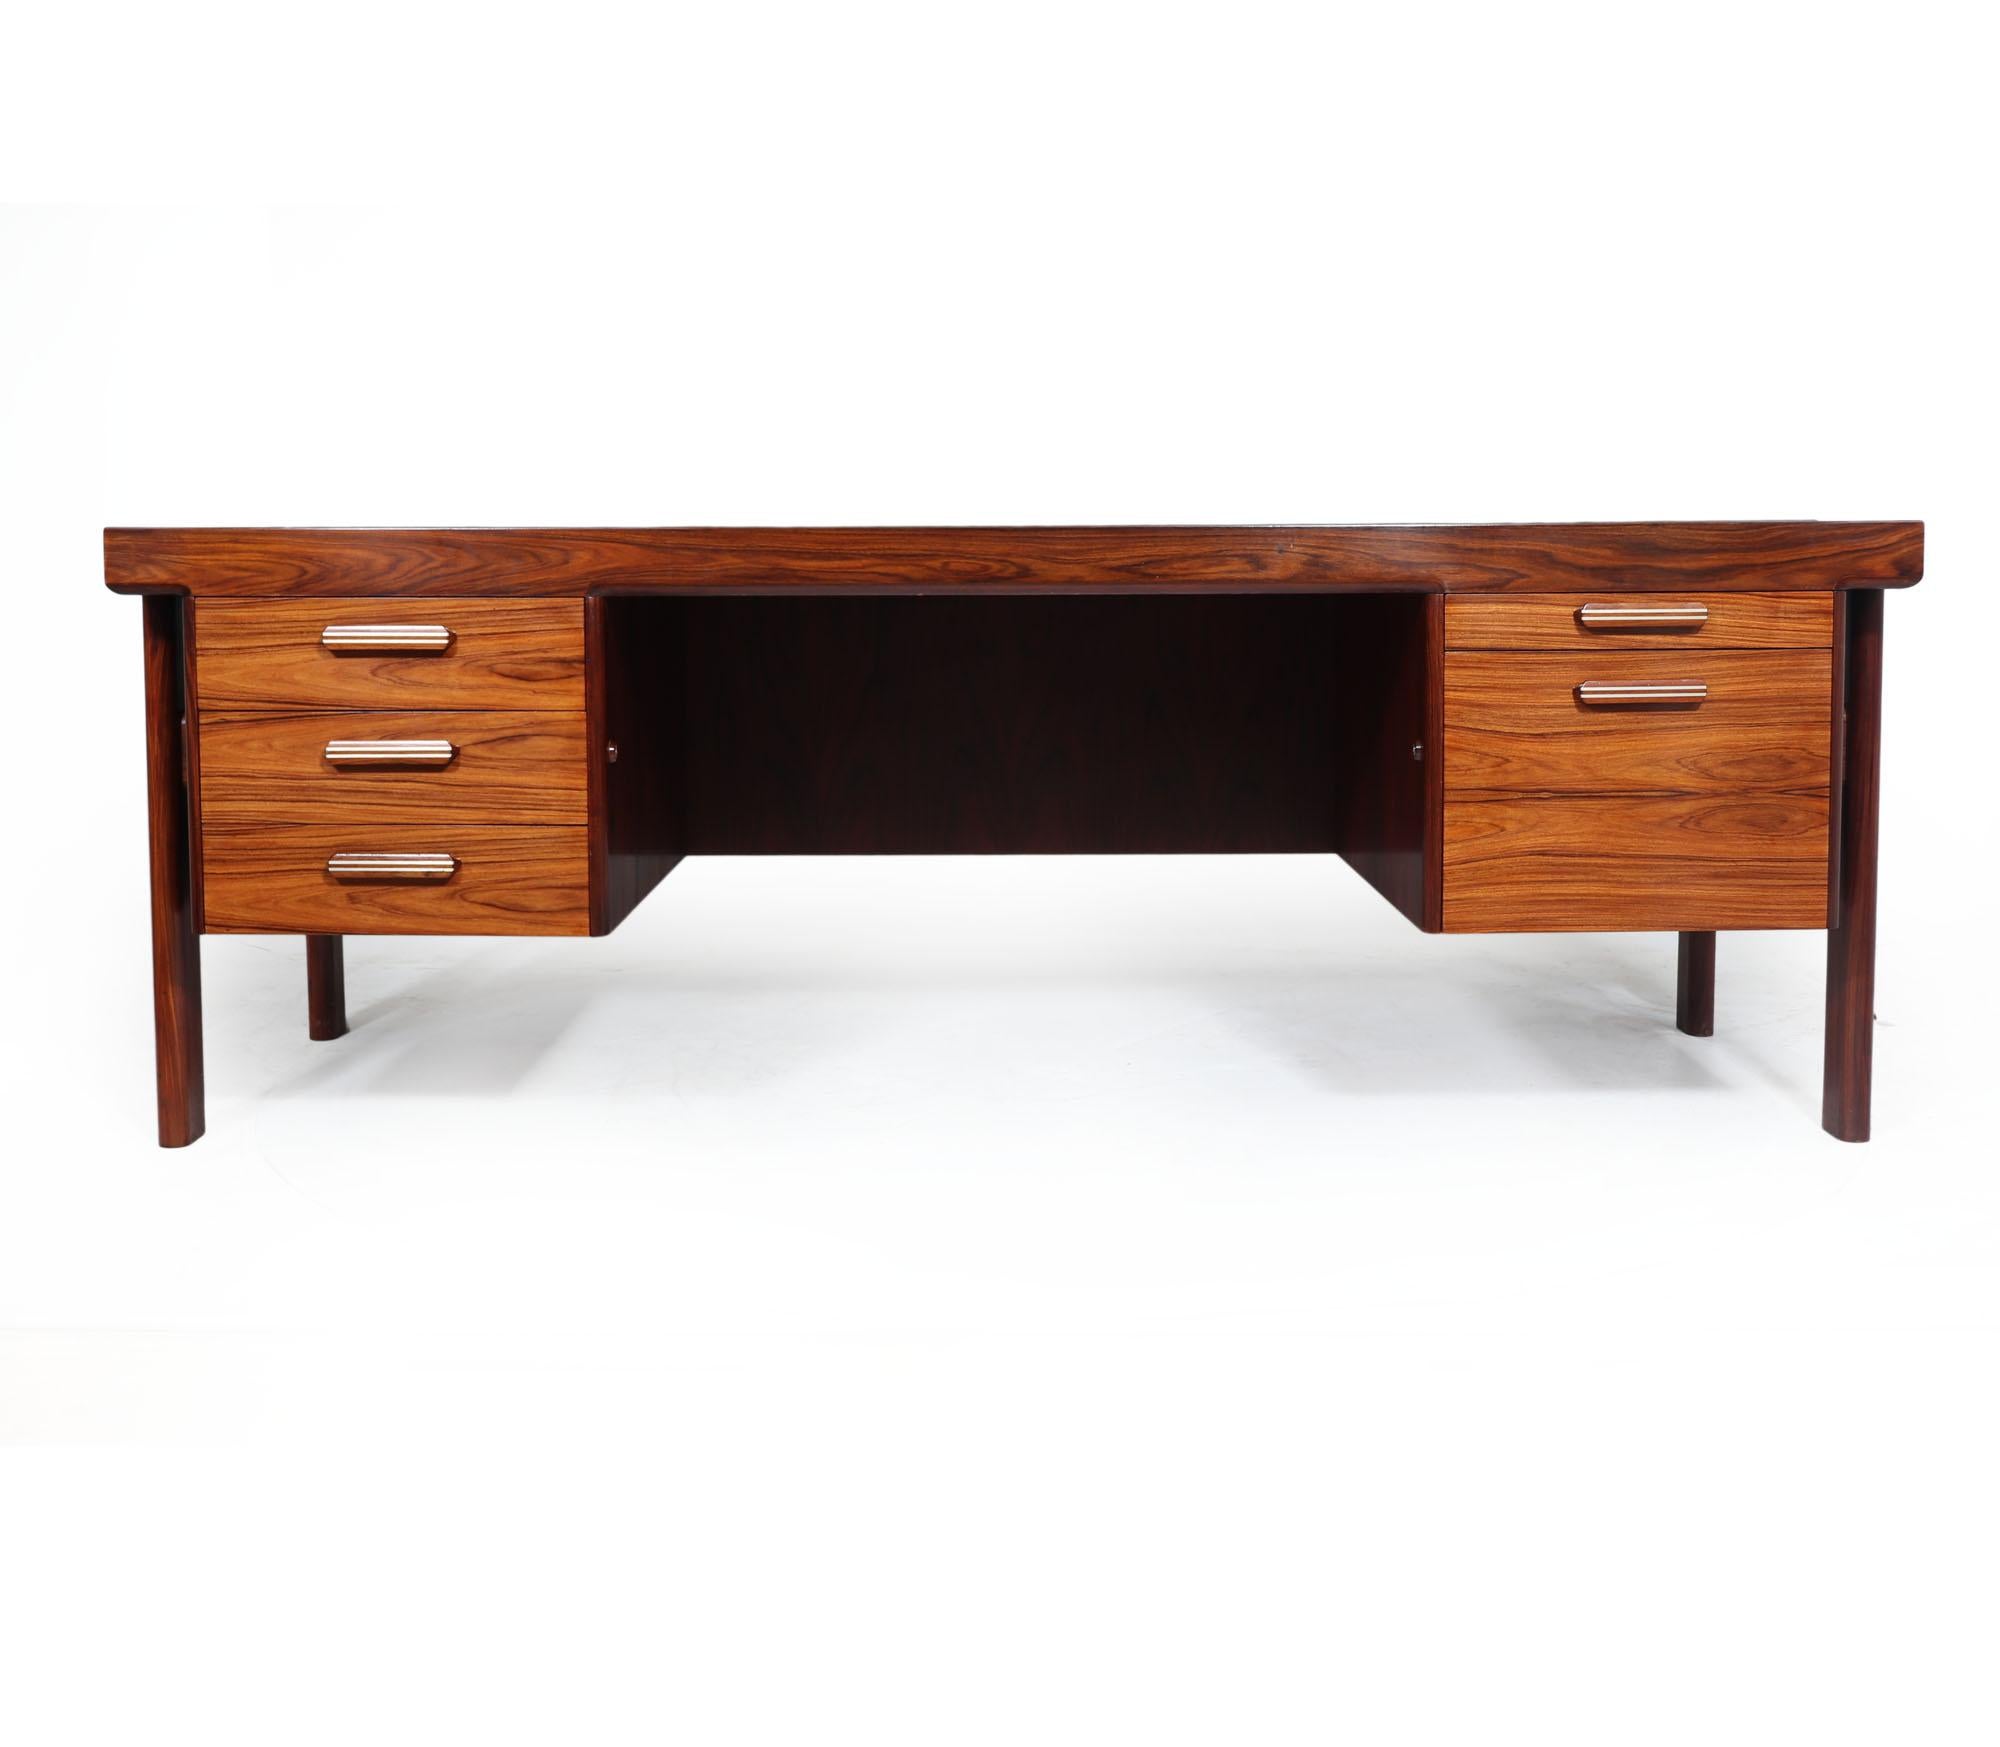 Danish desk by Arne Vodder 
A midcentury Danish desk designed by Arne Vodder and produced in Santos rosewood in the 1970s. The desk has tree drawers to the left and a pen tray with slide to the right and a large deep filing drawer below each having